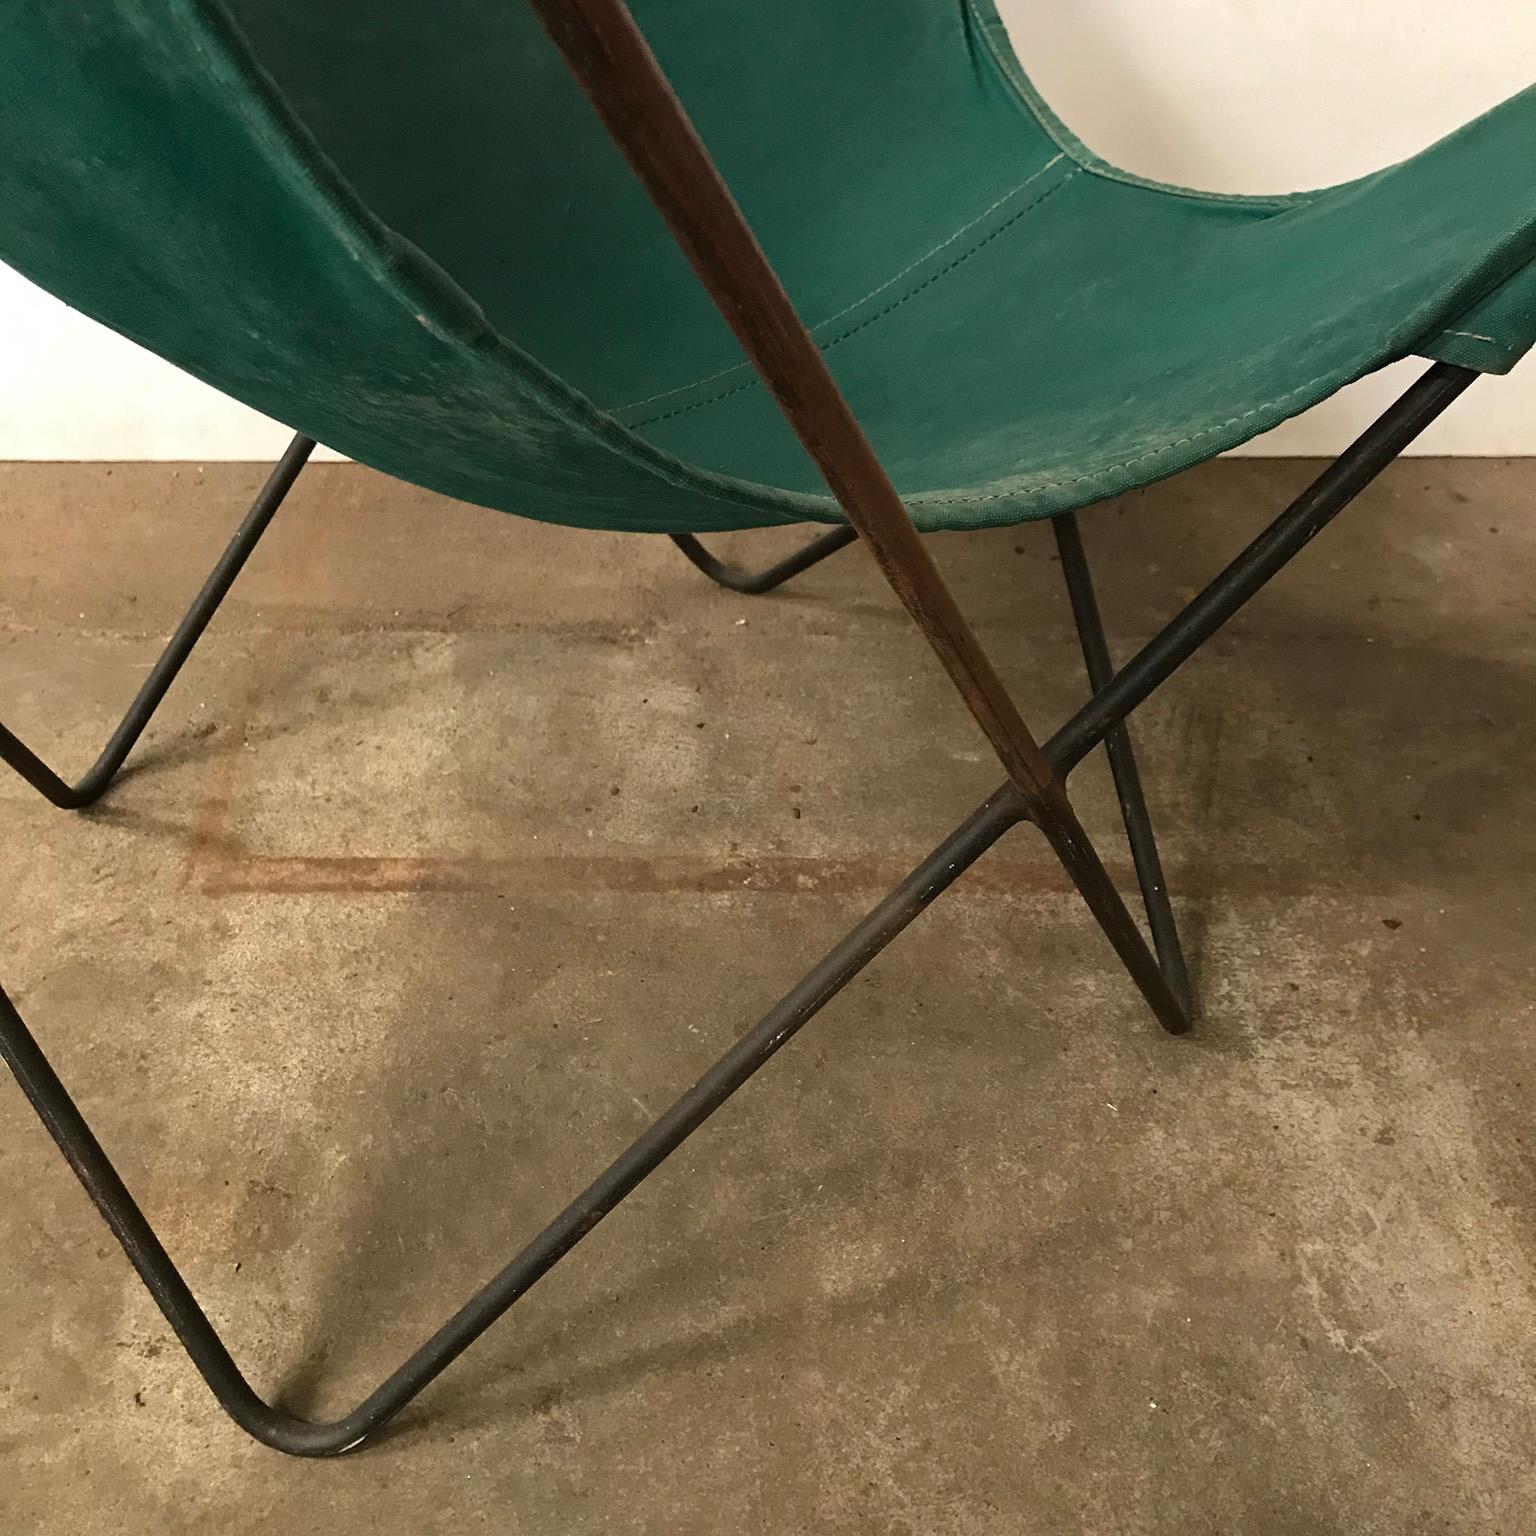 1947, Hardoy, Ferrari, Green Cover with Grey Base Butterfly Chair 8